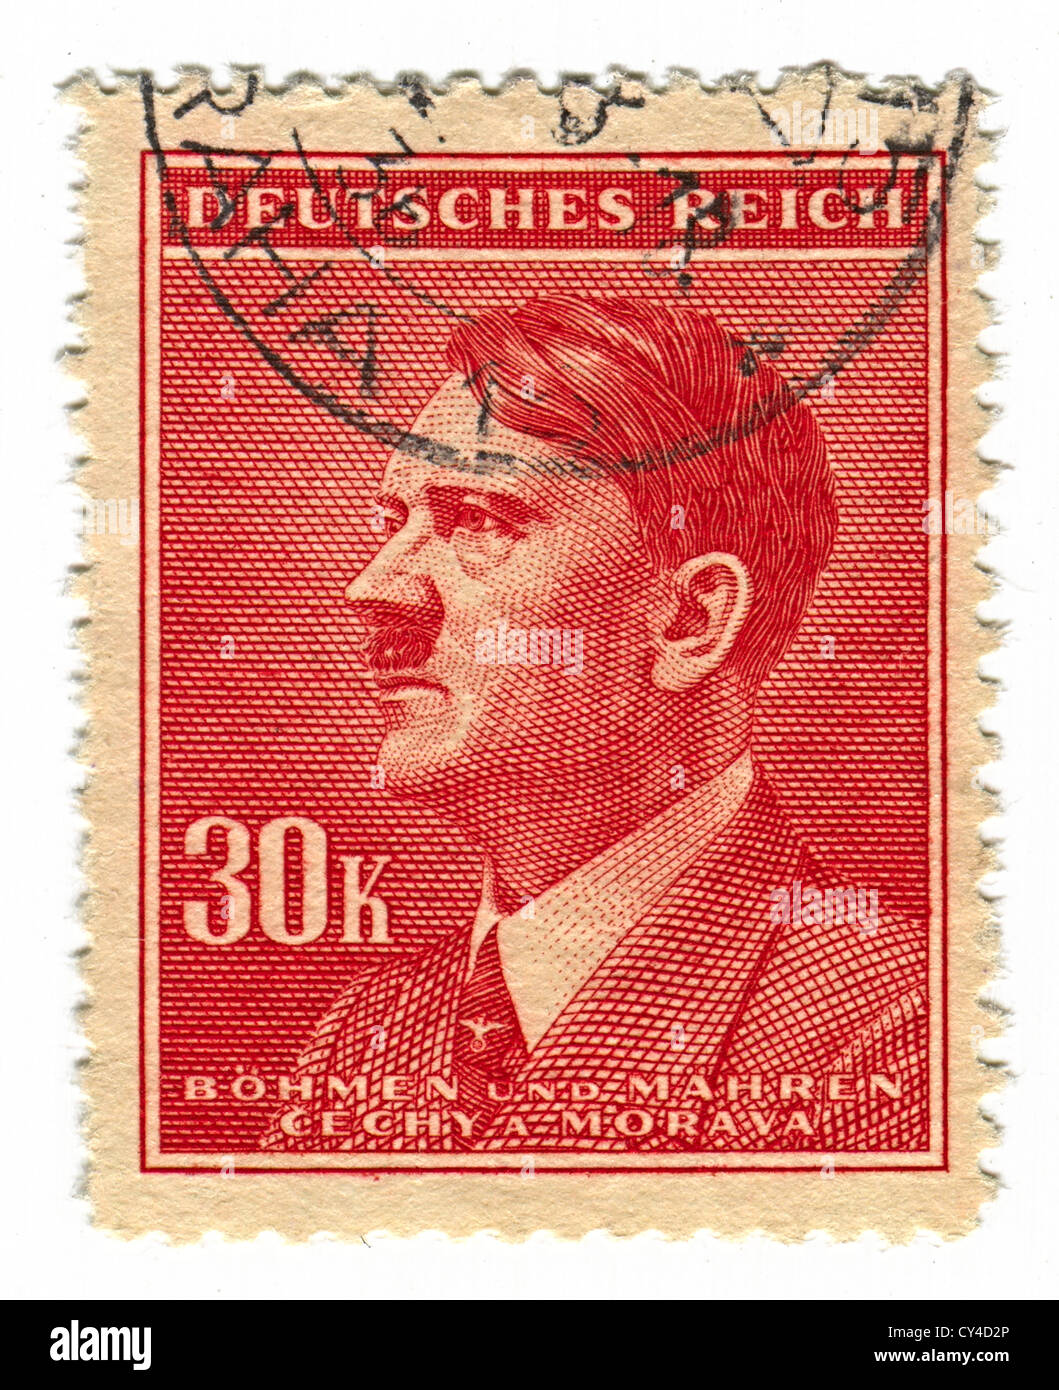 GERMANY - CIRCA 1943: A stamp printed in Germany shows image of Adolf Hitler was an Austrian-born German politician. Stock Photo